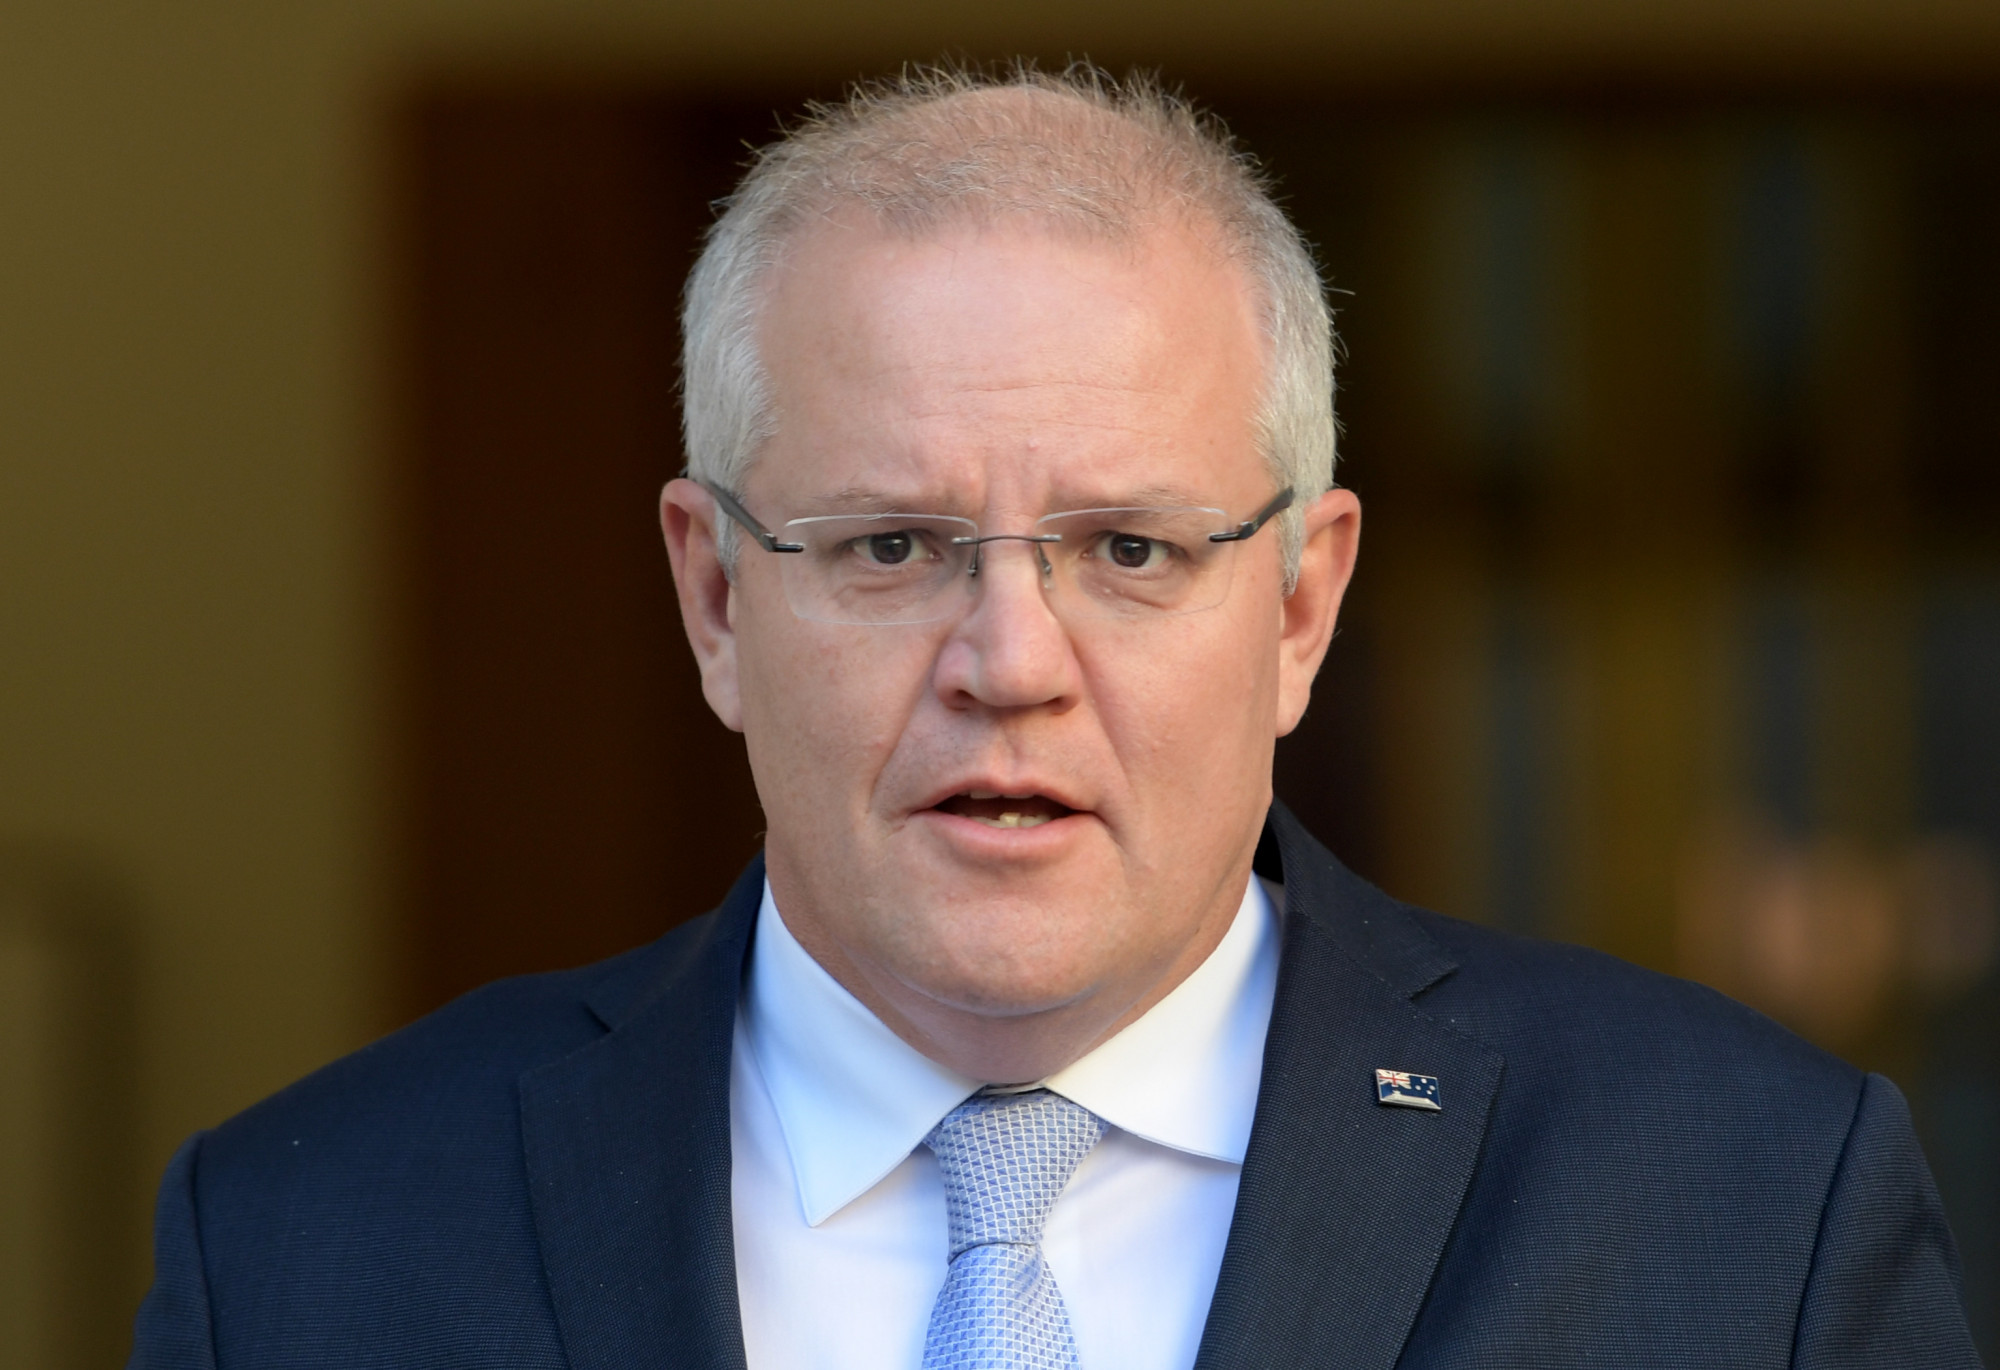 Australian Prime Minister Wants Peace Deal on Religious Freedoms